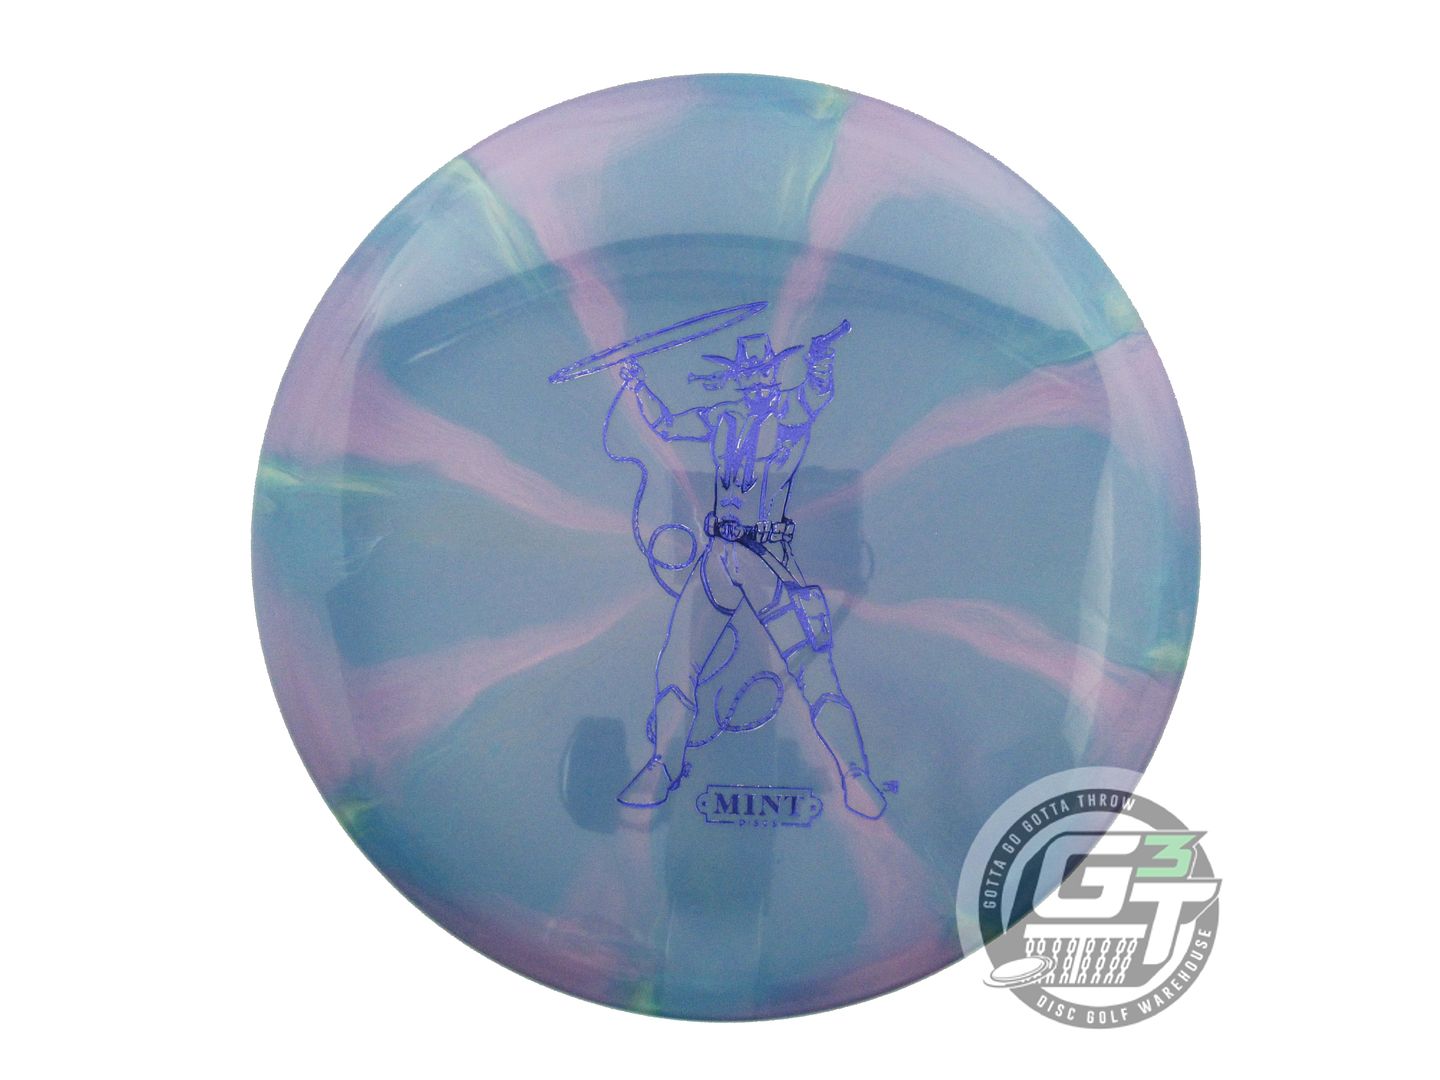 Mint Discs Limited Edition Super Mint Society Stamp Swirly Sublime Mustang Midrange Golf Disc (Individually Listed)